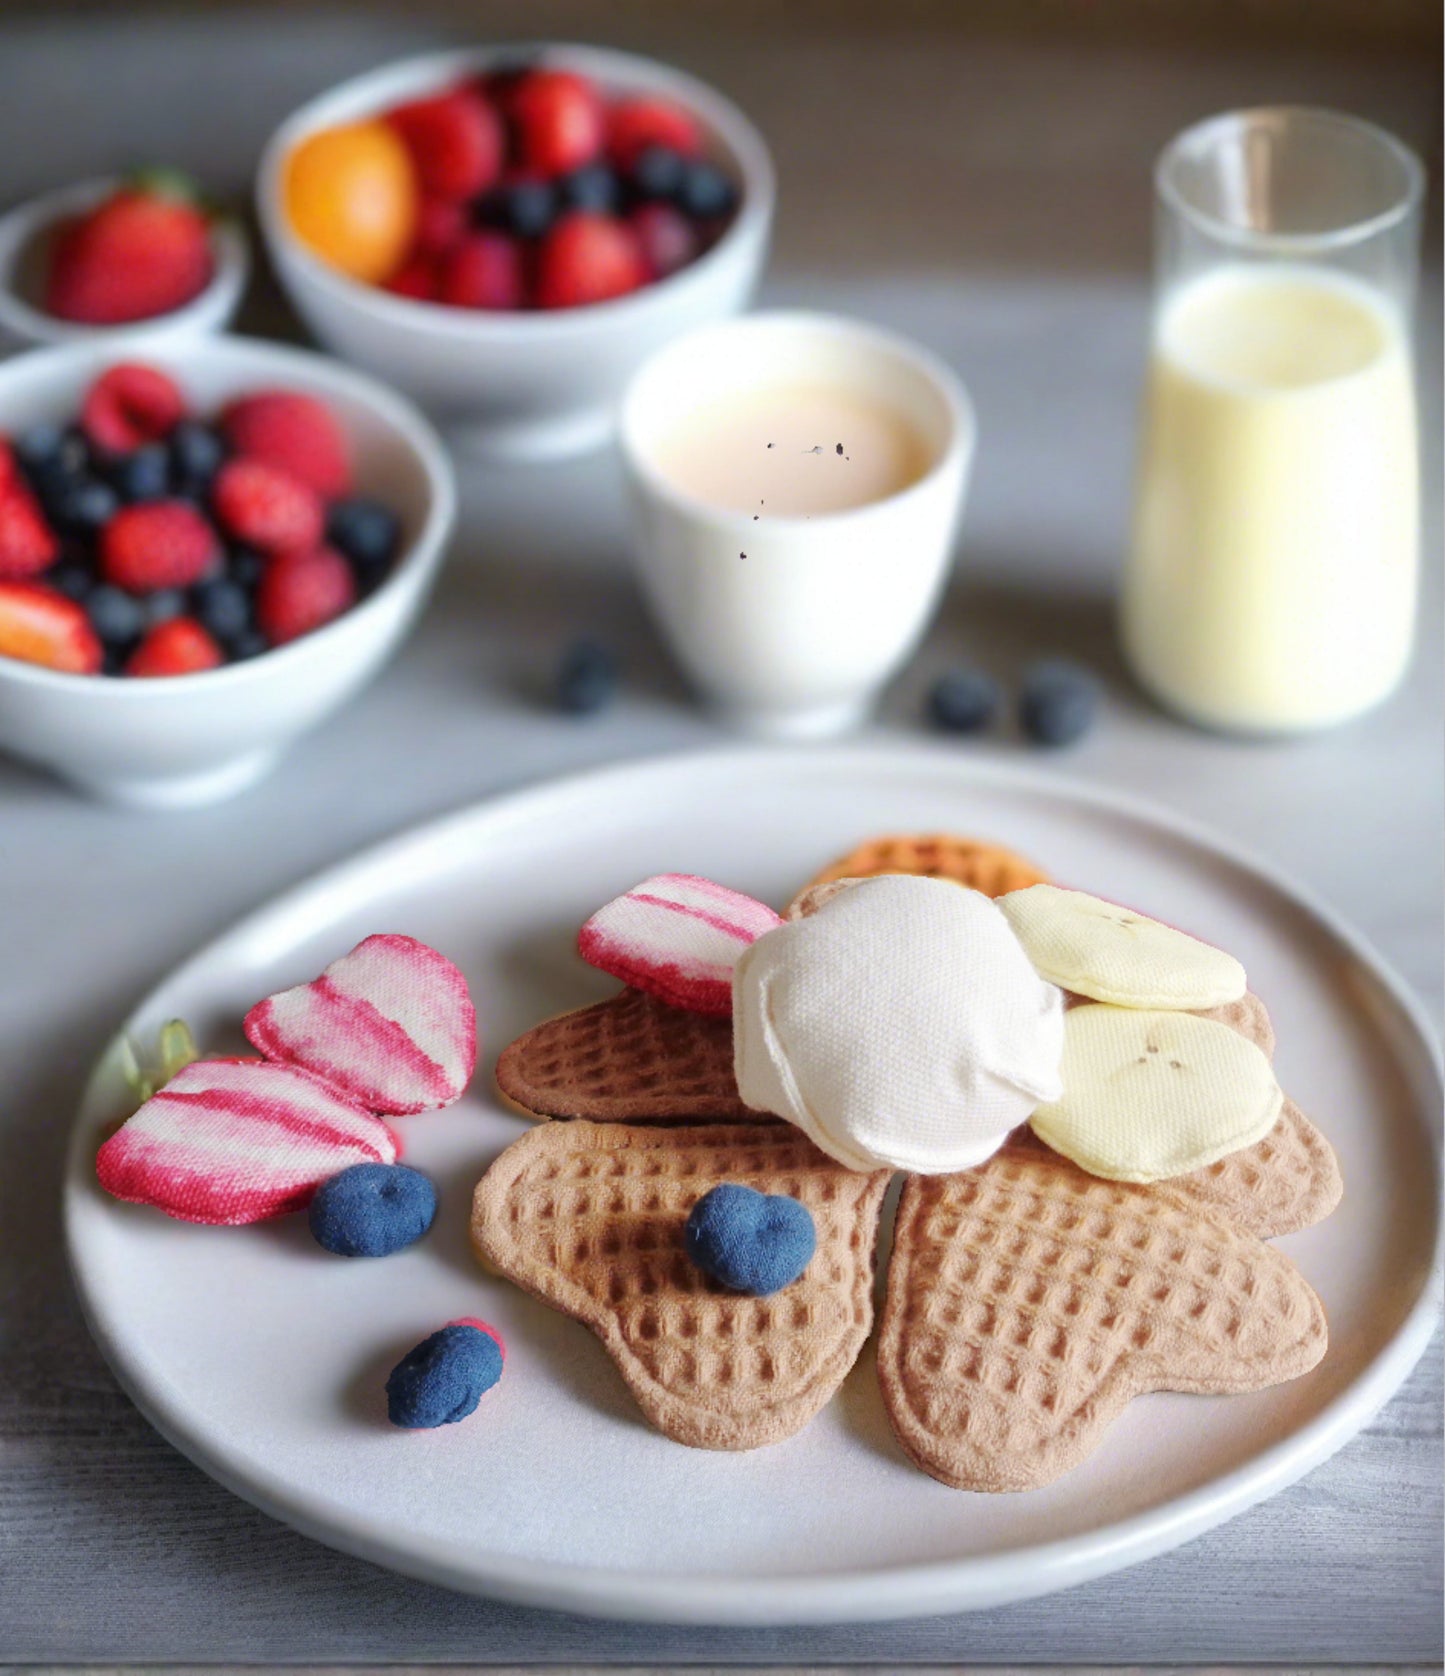 Waffles and Fruit